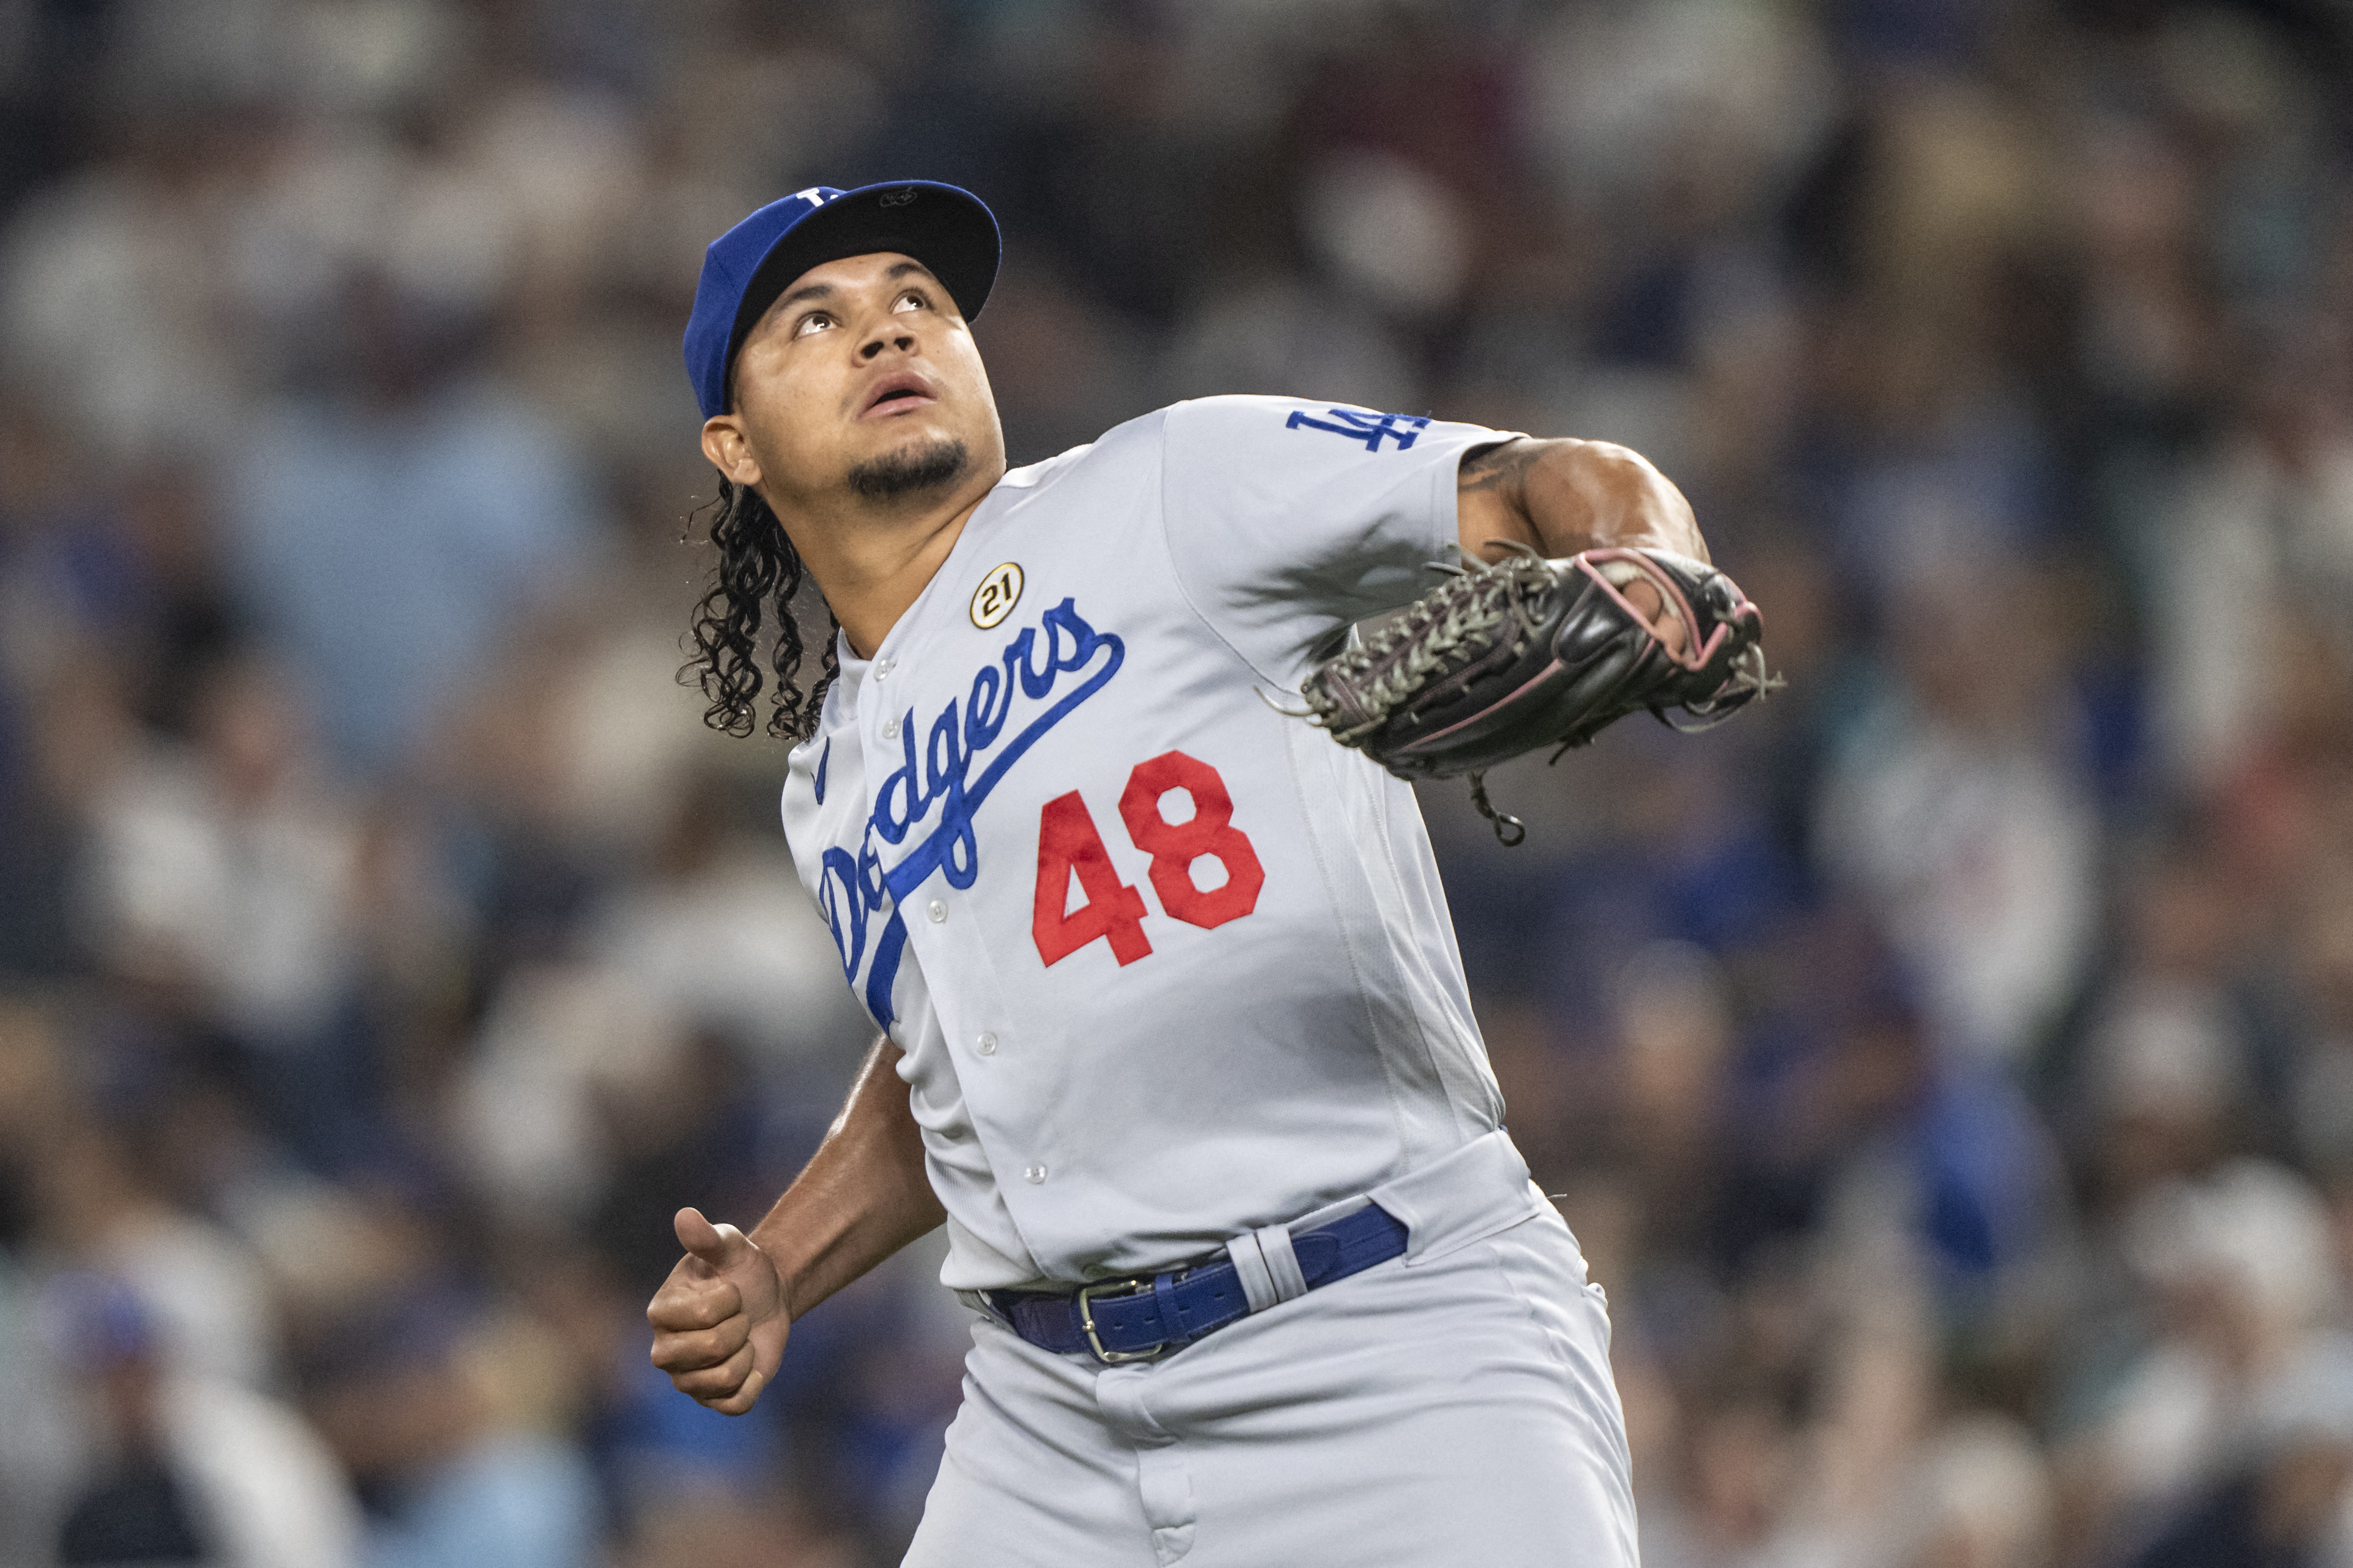 Dodgers beat Mariners, lower magic number to 2